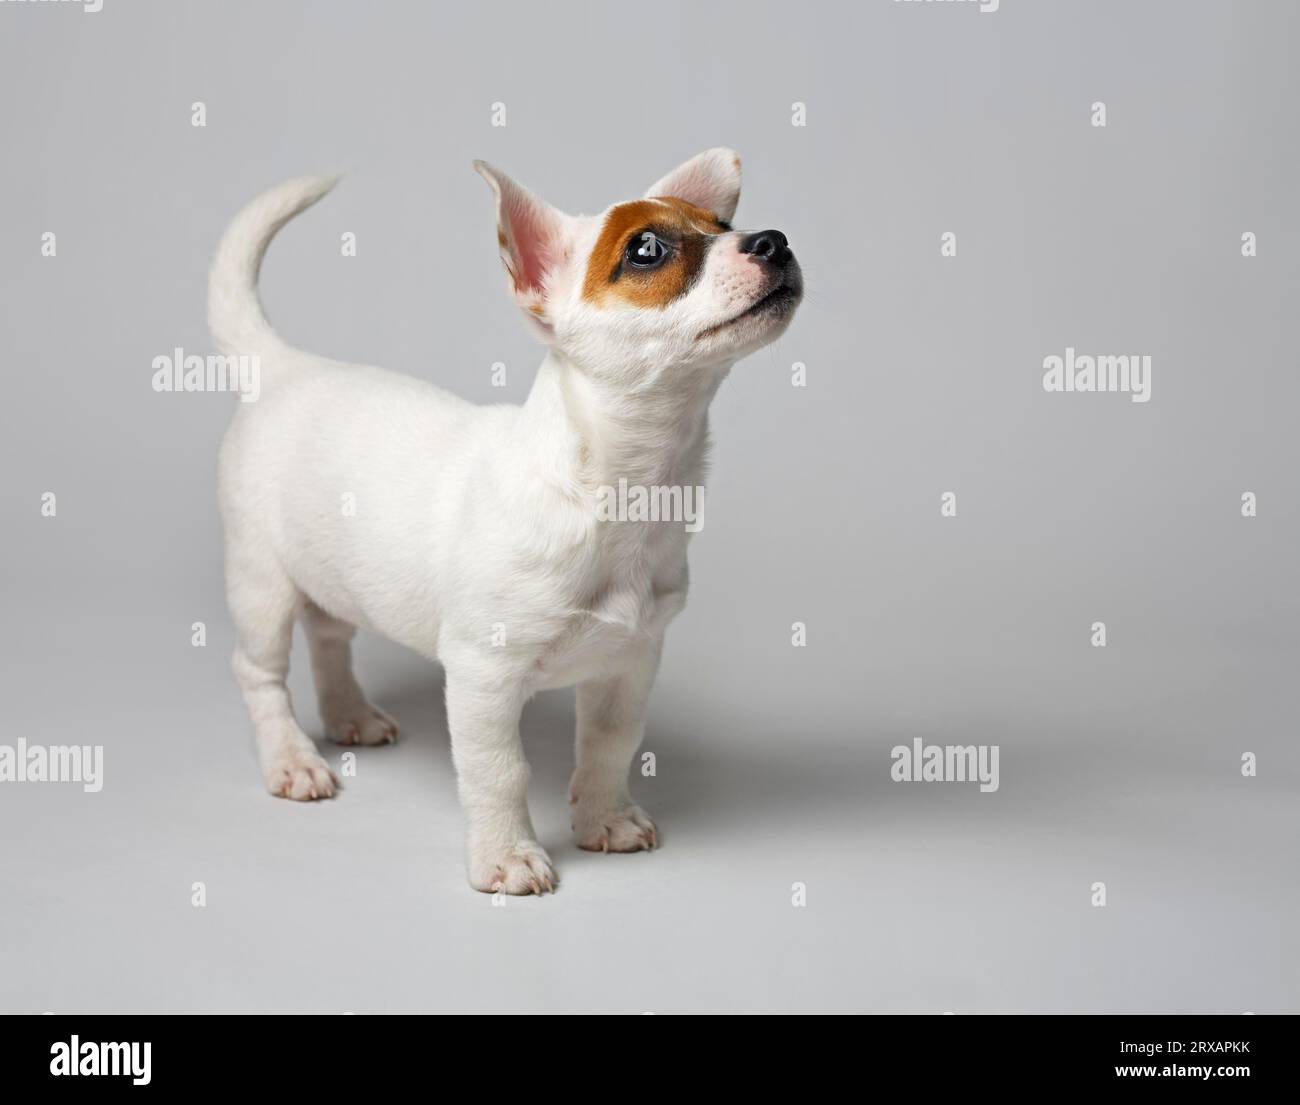 Jack Russell terrier puppy. Very short depth-of-field Stock Photo